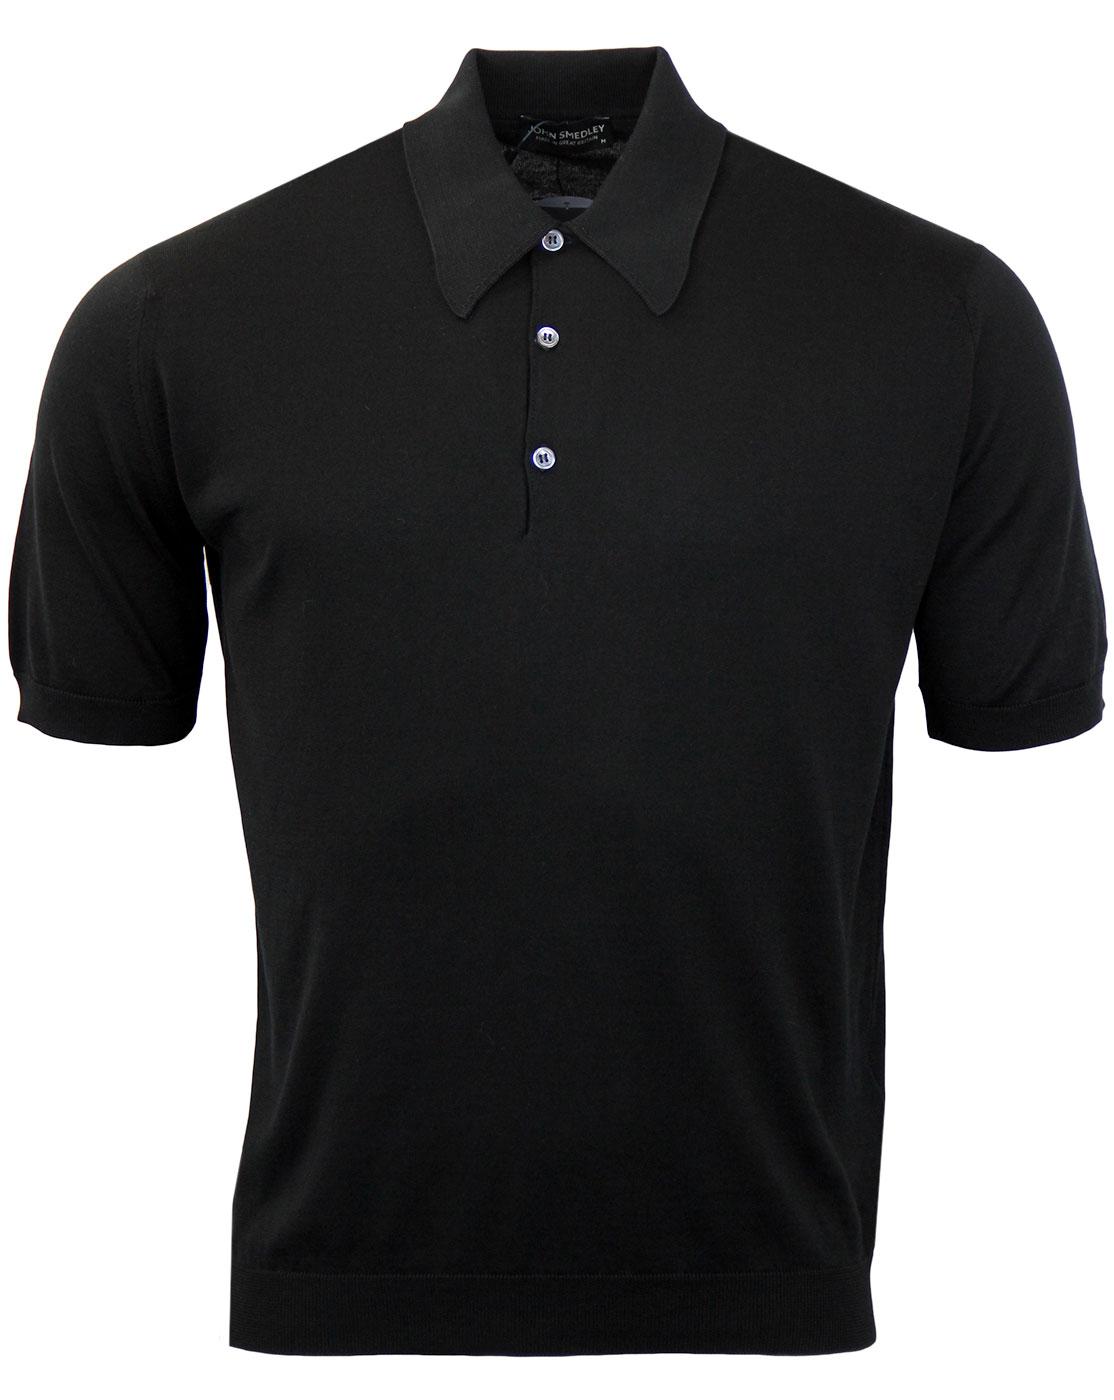 JOHN SMEDLEY Isis Retro 60s Mod Classic Fit Knitted Polo Black